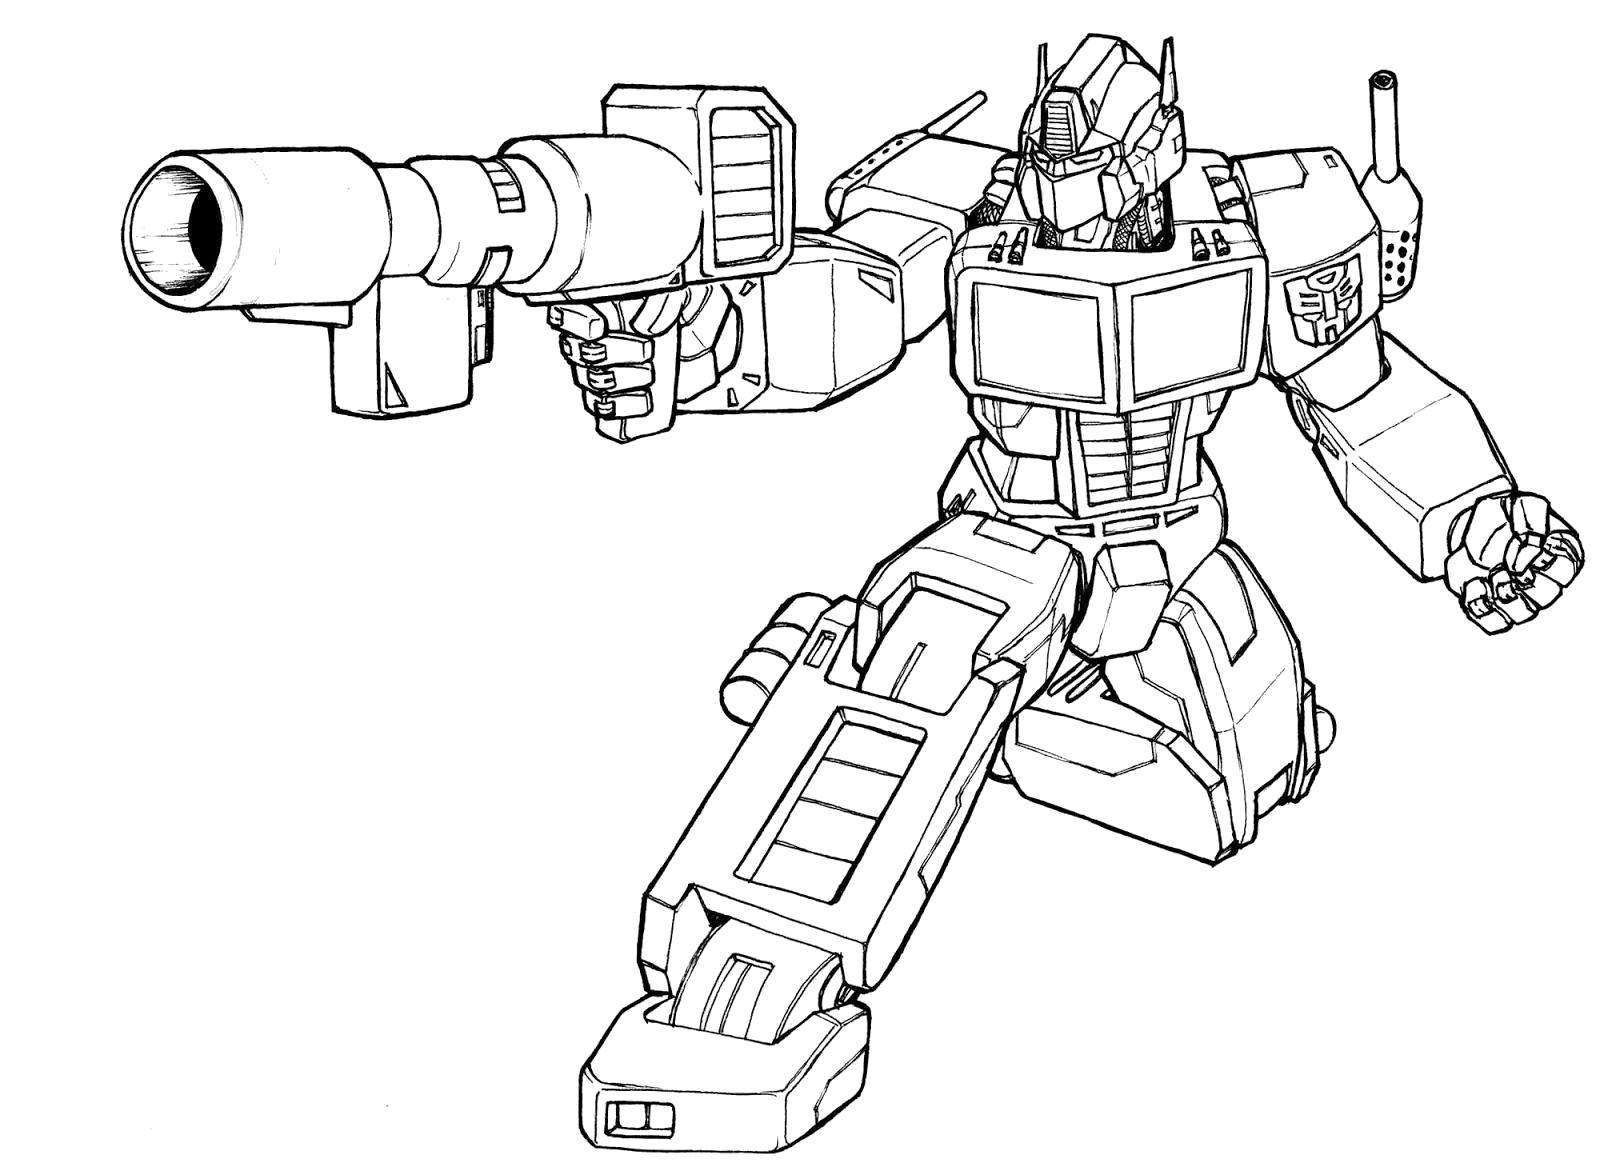 Coloring Transformer weapons. Category transformers. Tags:  Transformers.